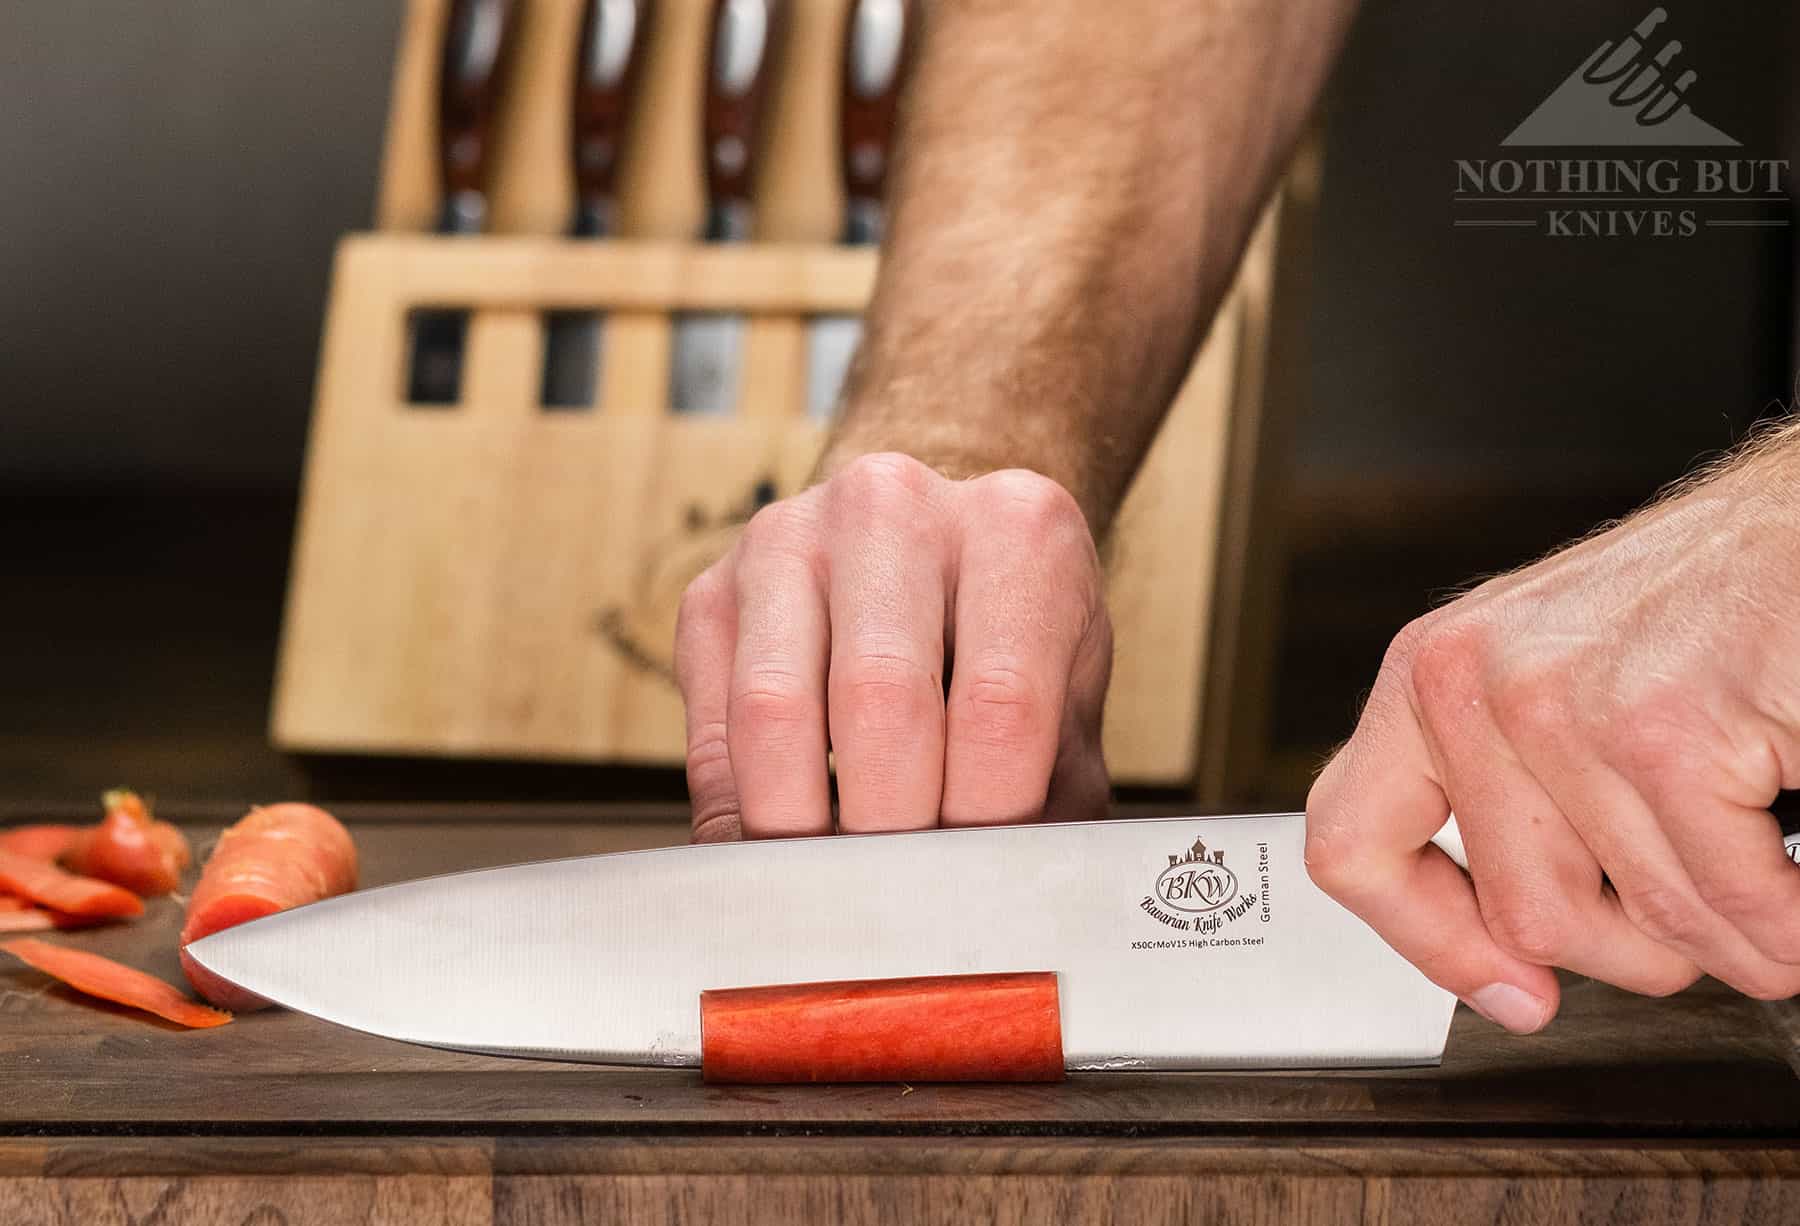 The 10 inch chef knife included in this set sets Bavarian Knife Works apart, because large chef knife are not usually included in factory sets. 